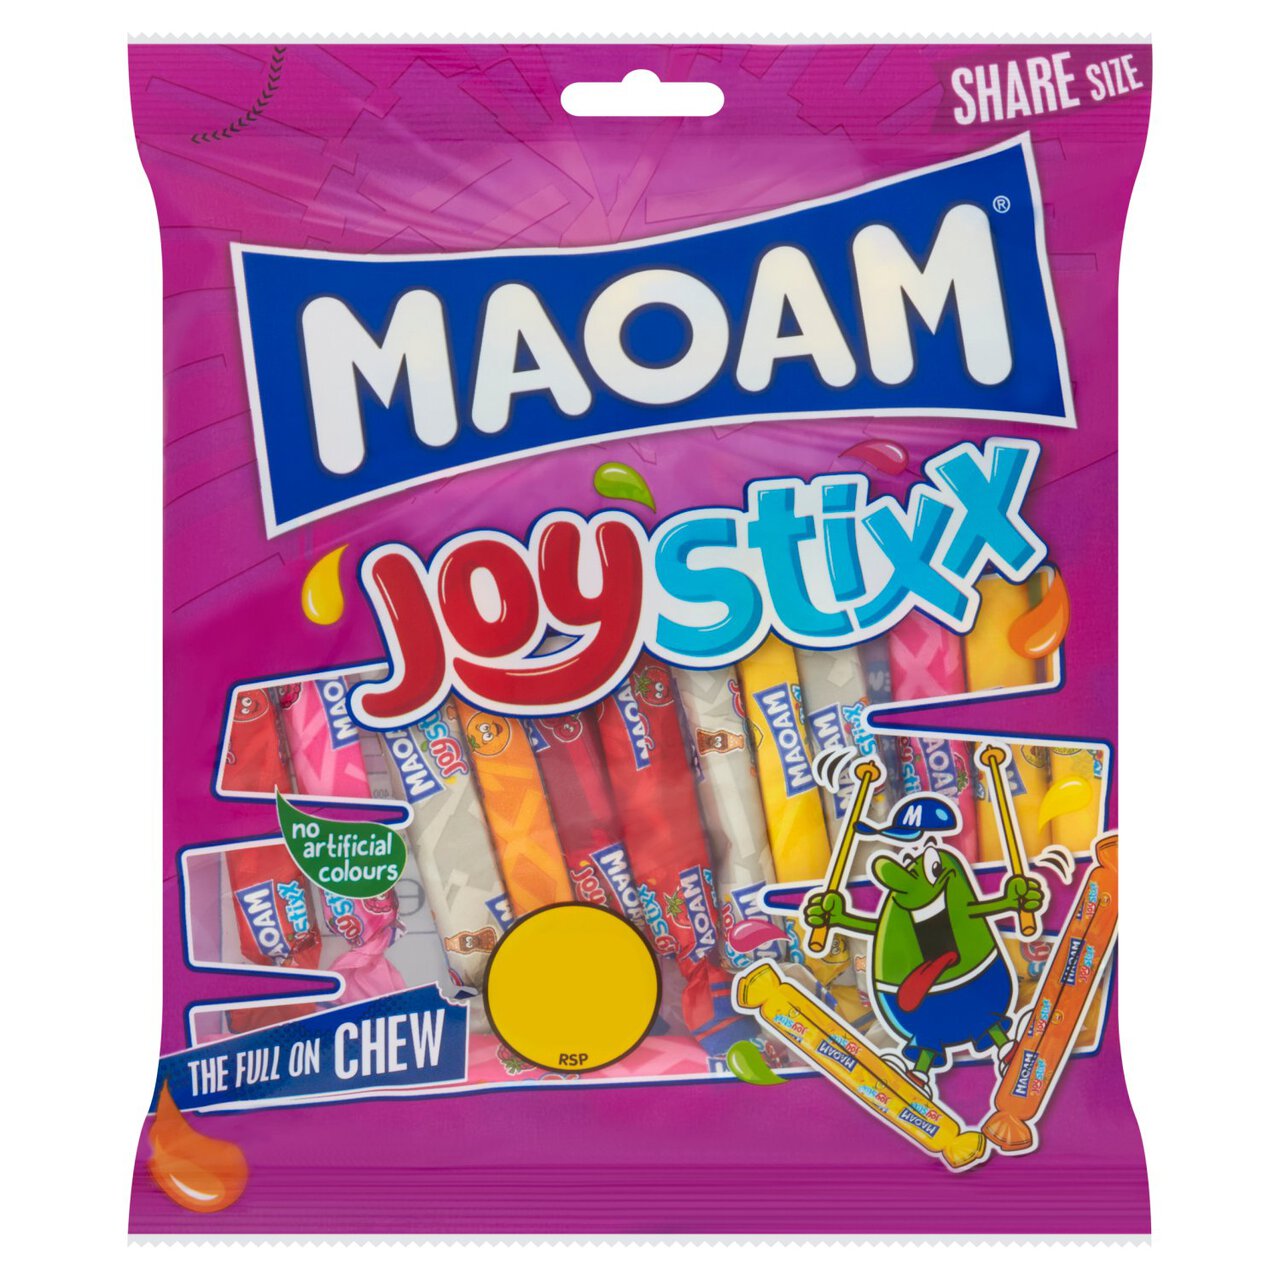 Maoam Joystixx Chewy Wrapped Sweets Sharing Bag 140g